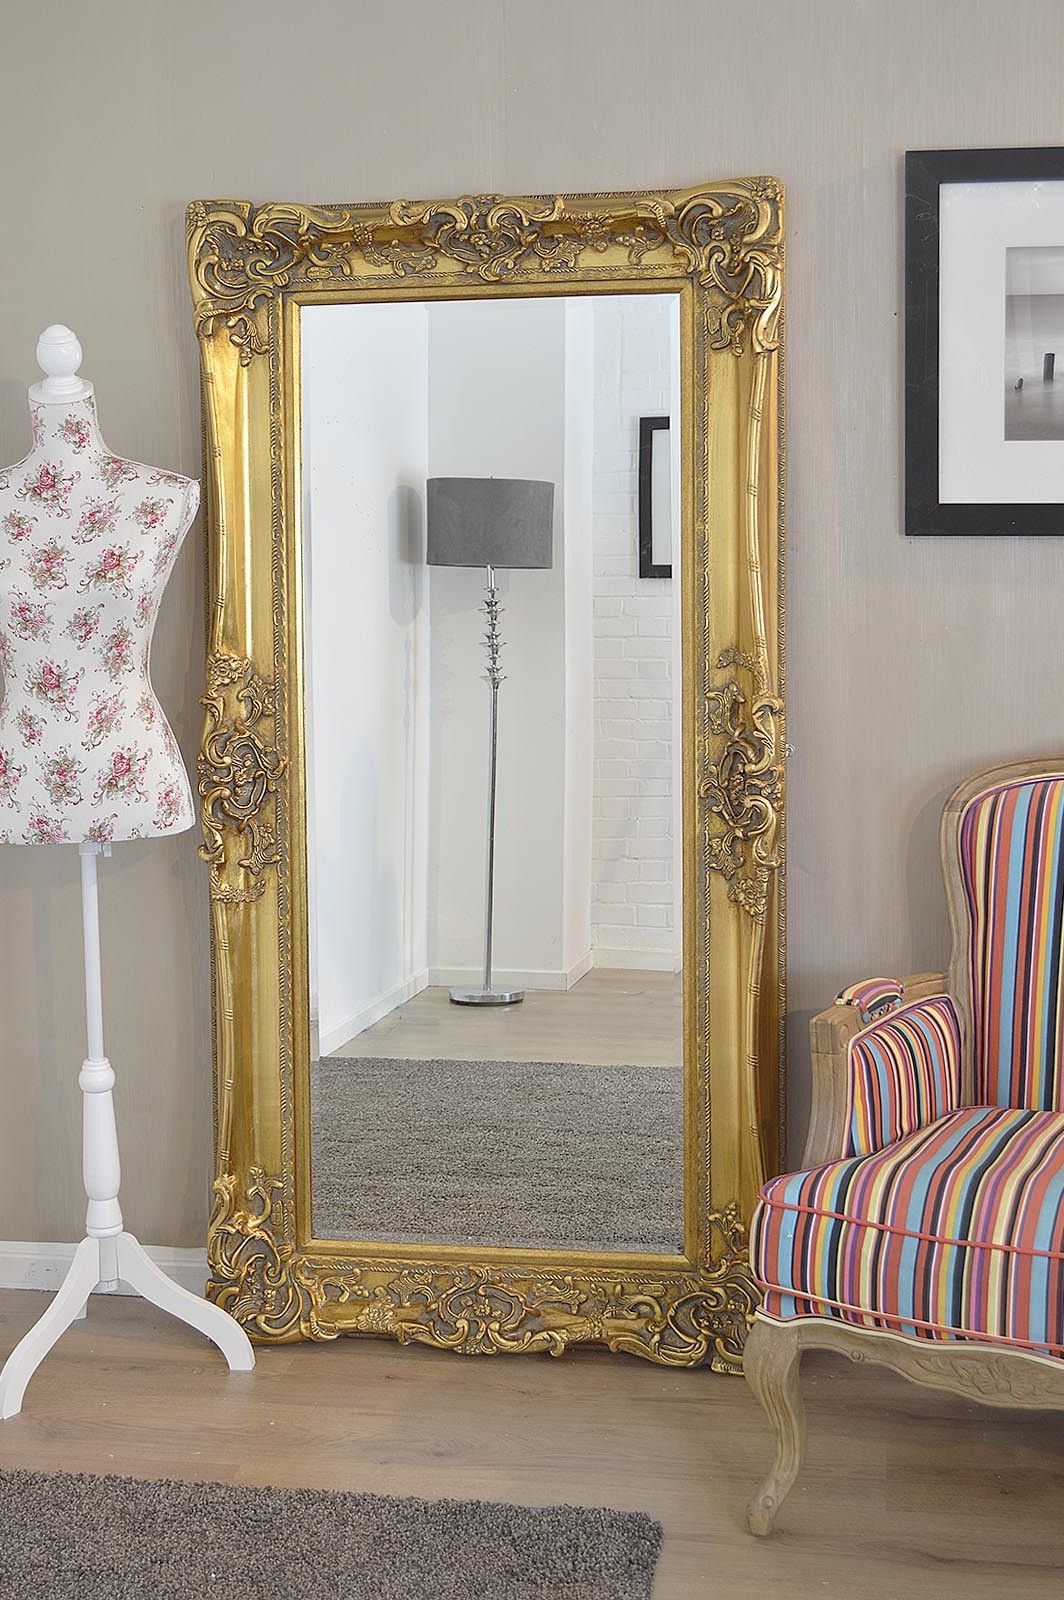 Large Antique Wall Mirrors Throughout Most Popular Vintage Wall Hanging Mirrors Antique Mirror Hooks Classic Large Flat (View 16 of 20)